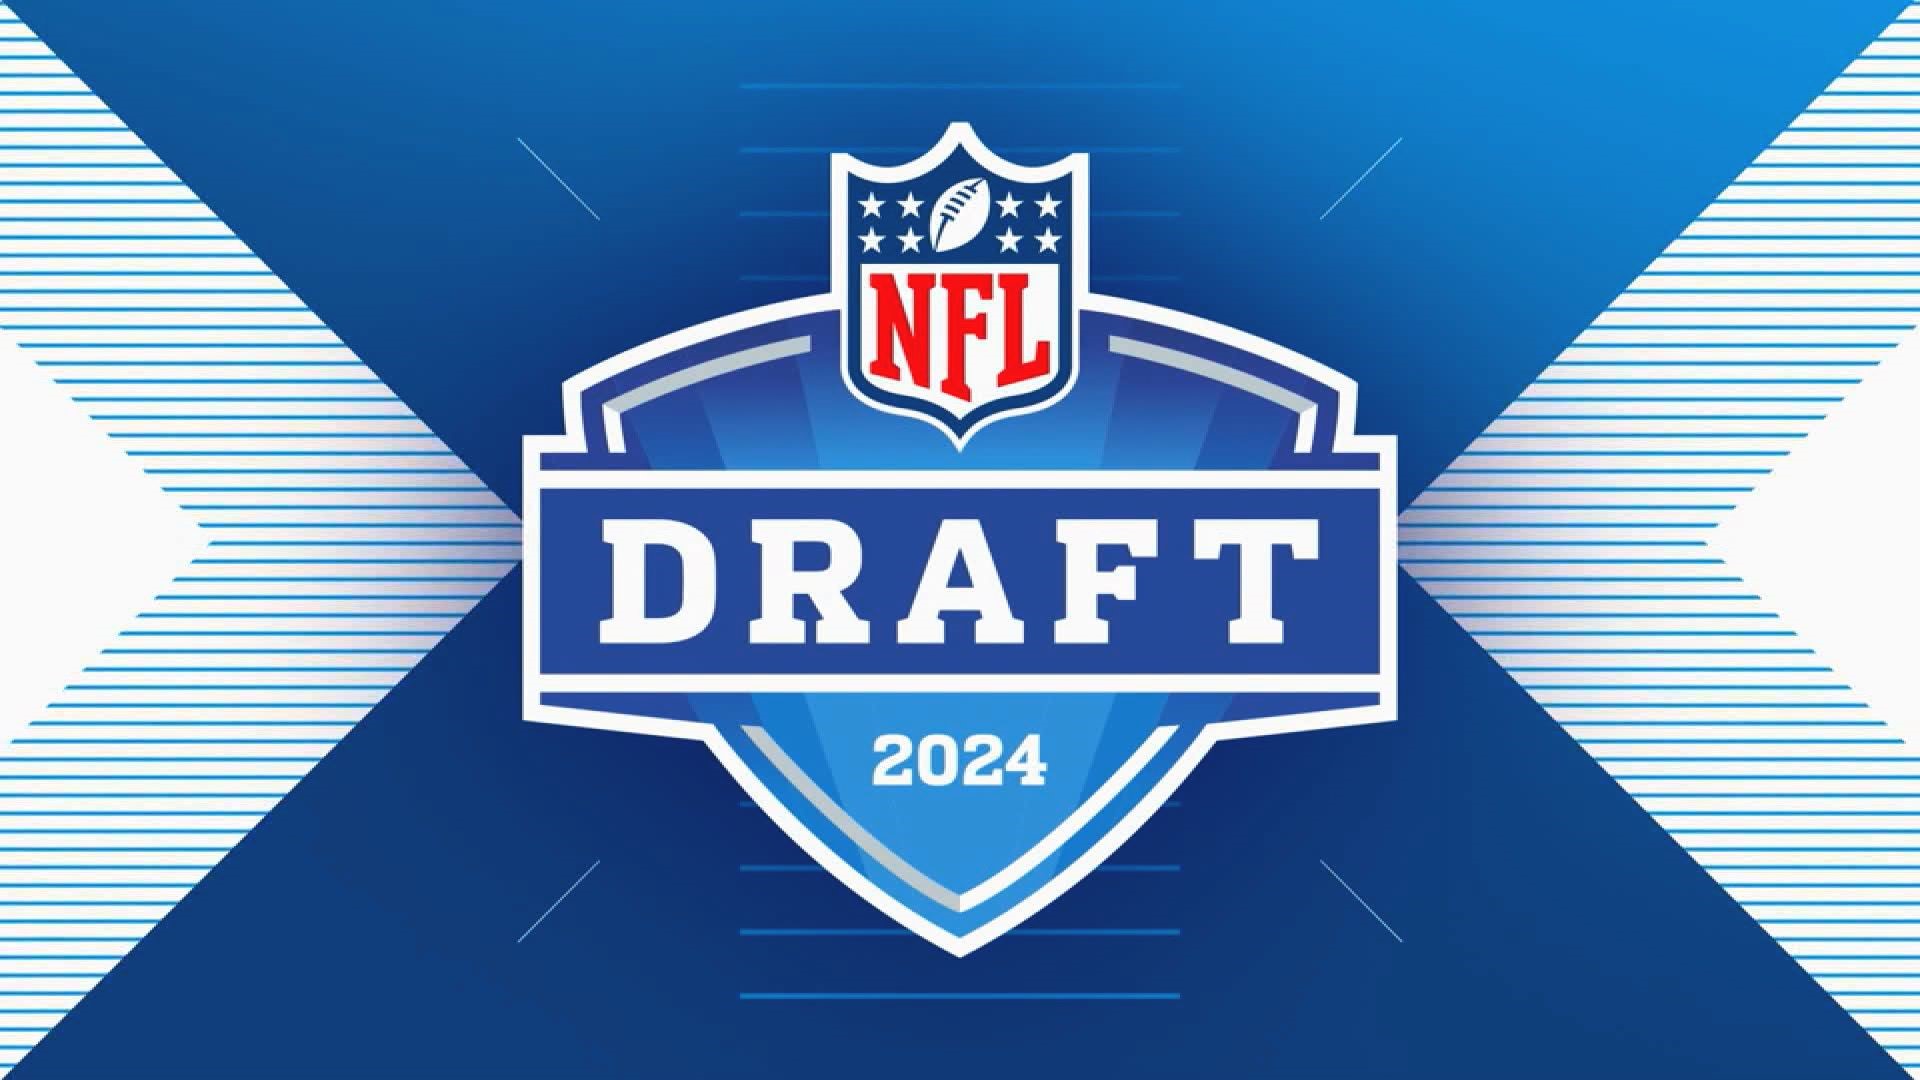 Join Mark, Jacob, Brad, and Blake as they preview the 2024 Draft, debate the future of Michigan QB JJ McCarthy, and discuss all the big topics surrounding draft day.